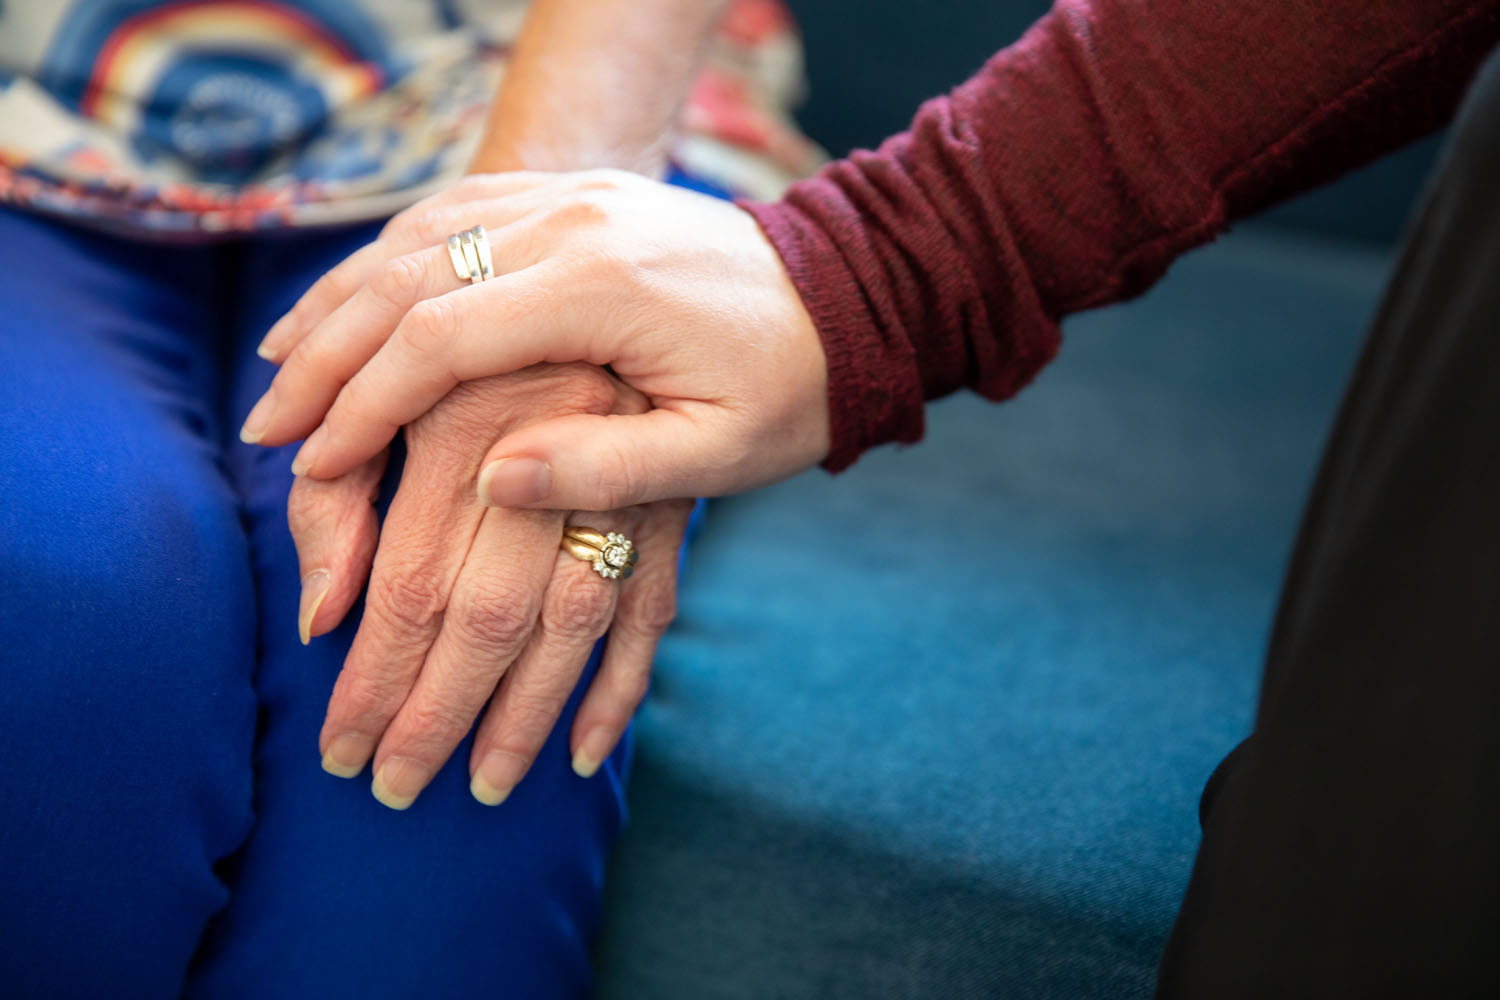 Alzheimer's Care in Norwood - At Arbor Terrace, we foster meaningful connections with our residents.